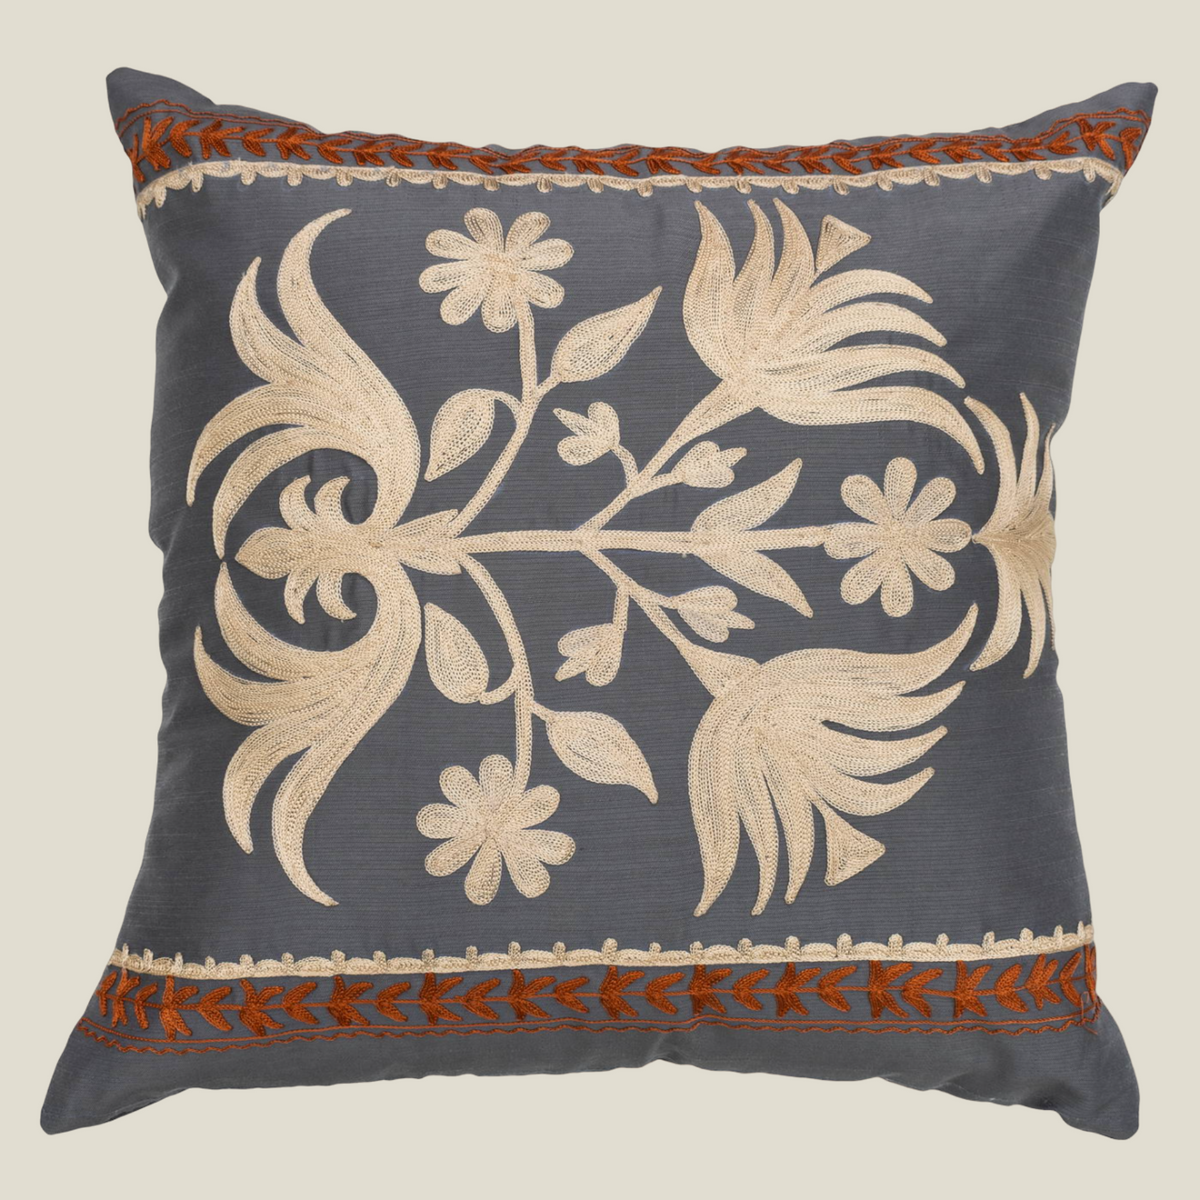 The Luxelife Grey Dupion Floral Embroidered Cushion Cover